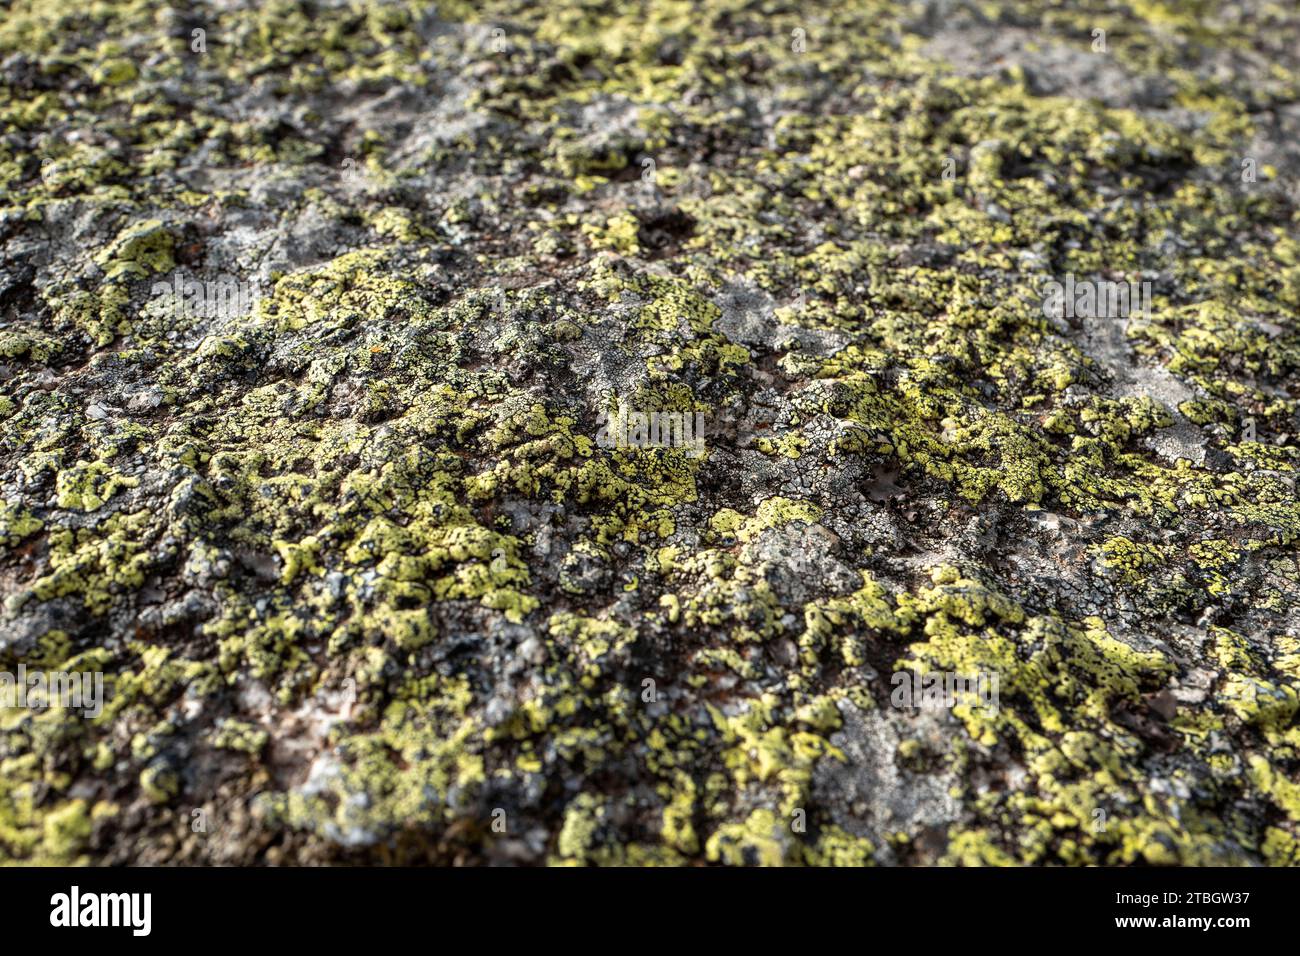 Green lichen growing on rock Stock Photo